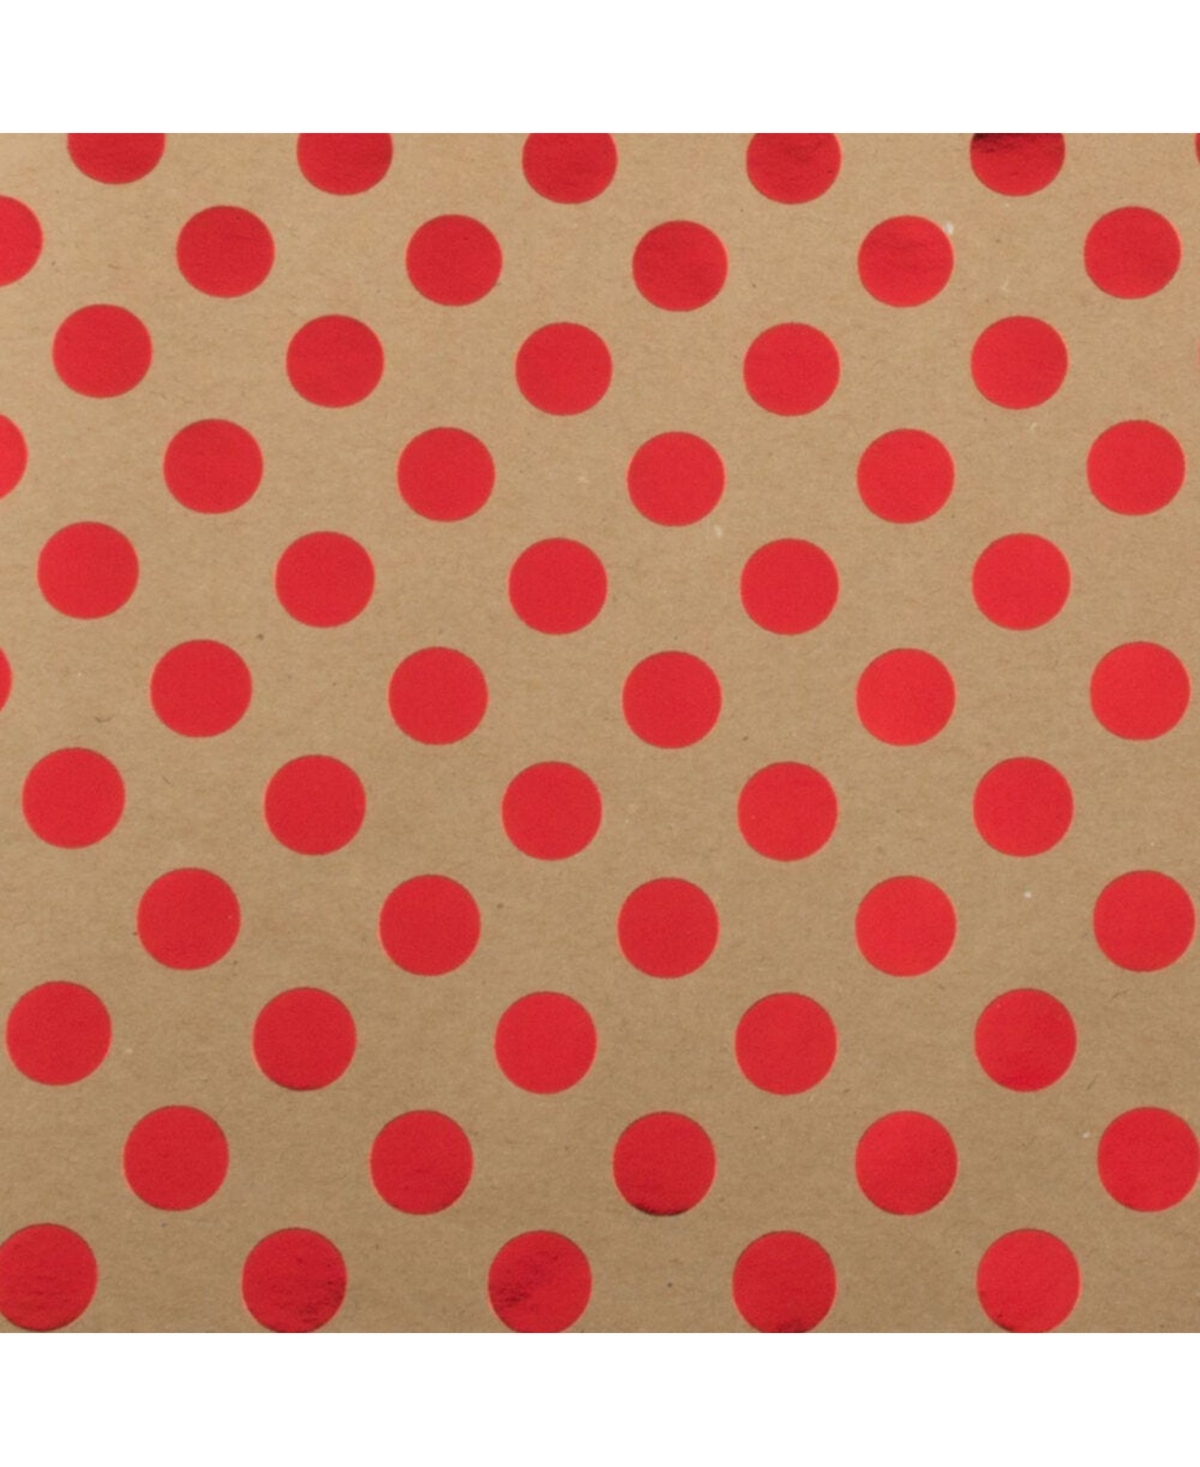 Jam Paper Gift Wrap - Matte Wrapping Paper - 25 Sq ft - Matte Chocolate Brown - Roll Sold Individually